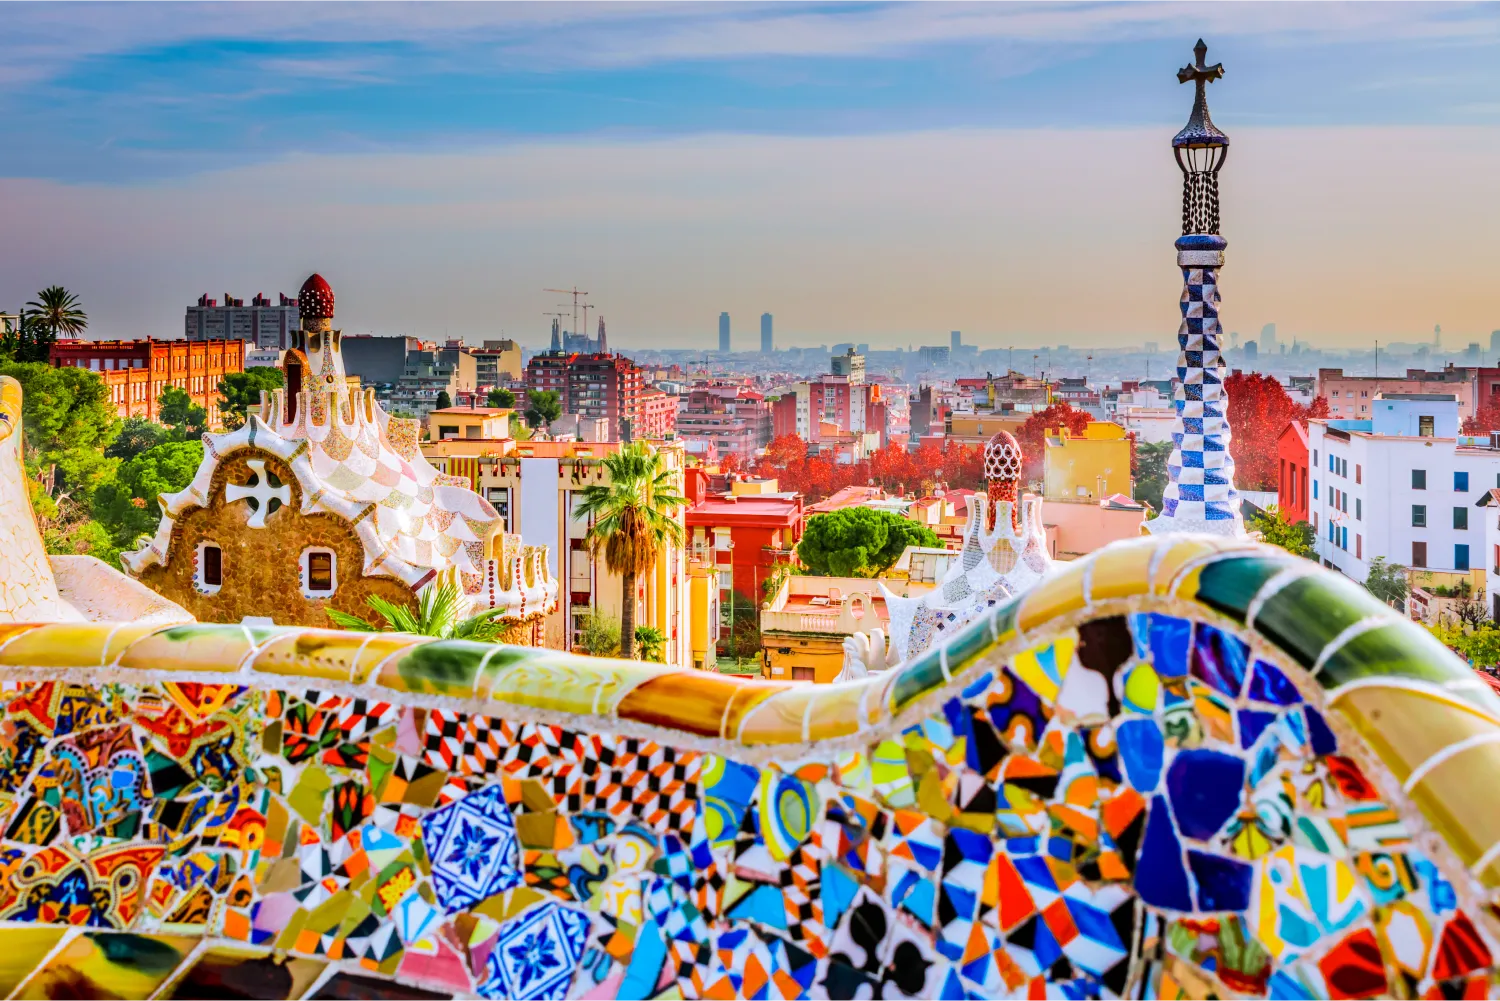 View to the city from the colorful Park Guell in Barcelona